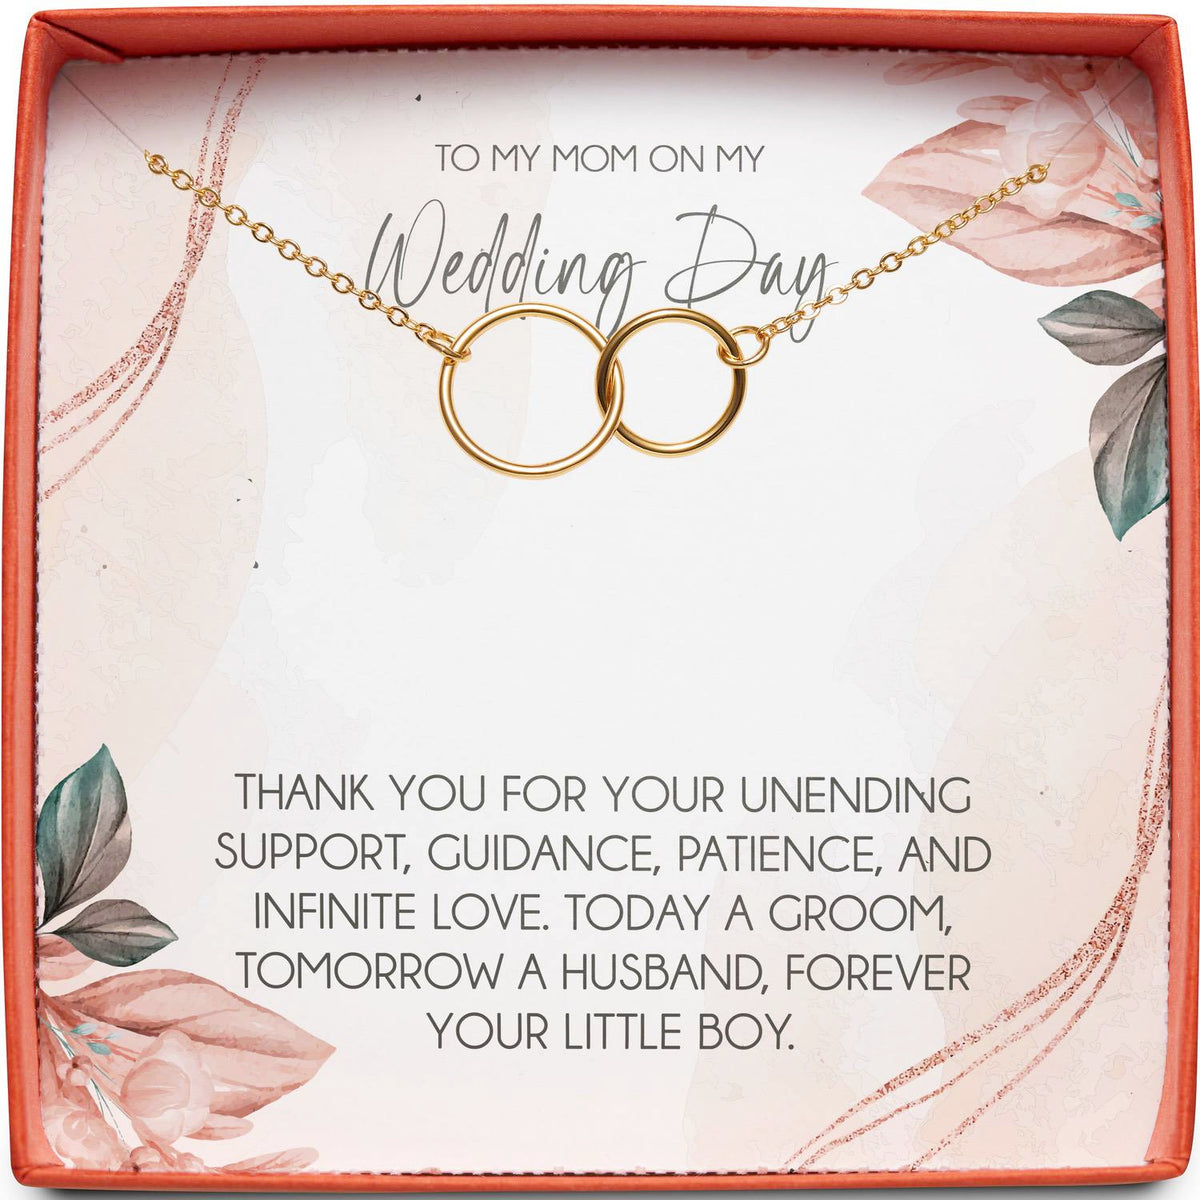 To My Mom on my Wedding Day (From Groom) | Forever Your Little Boy | Interlocking Circles